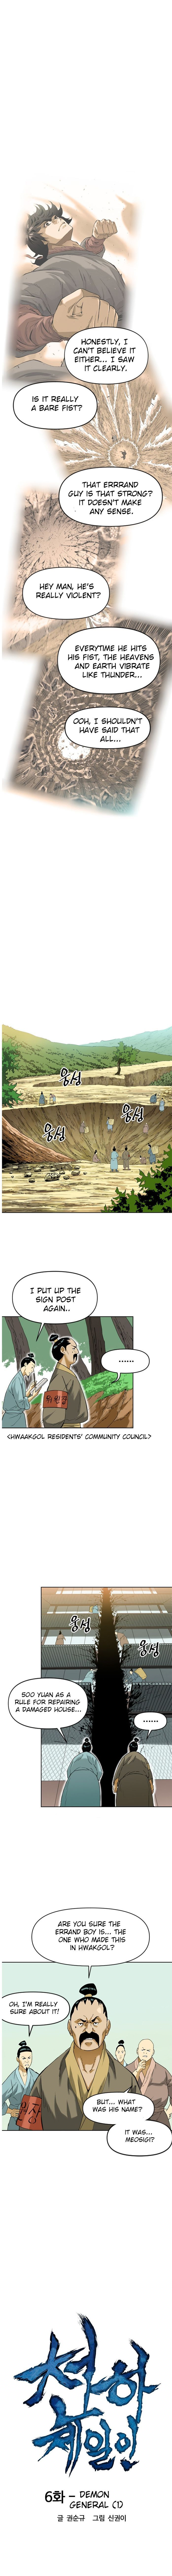 The Greatest in the World Chapter 6 page 2